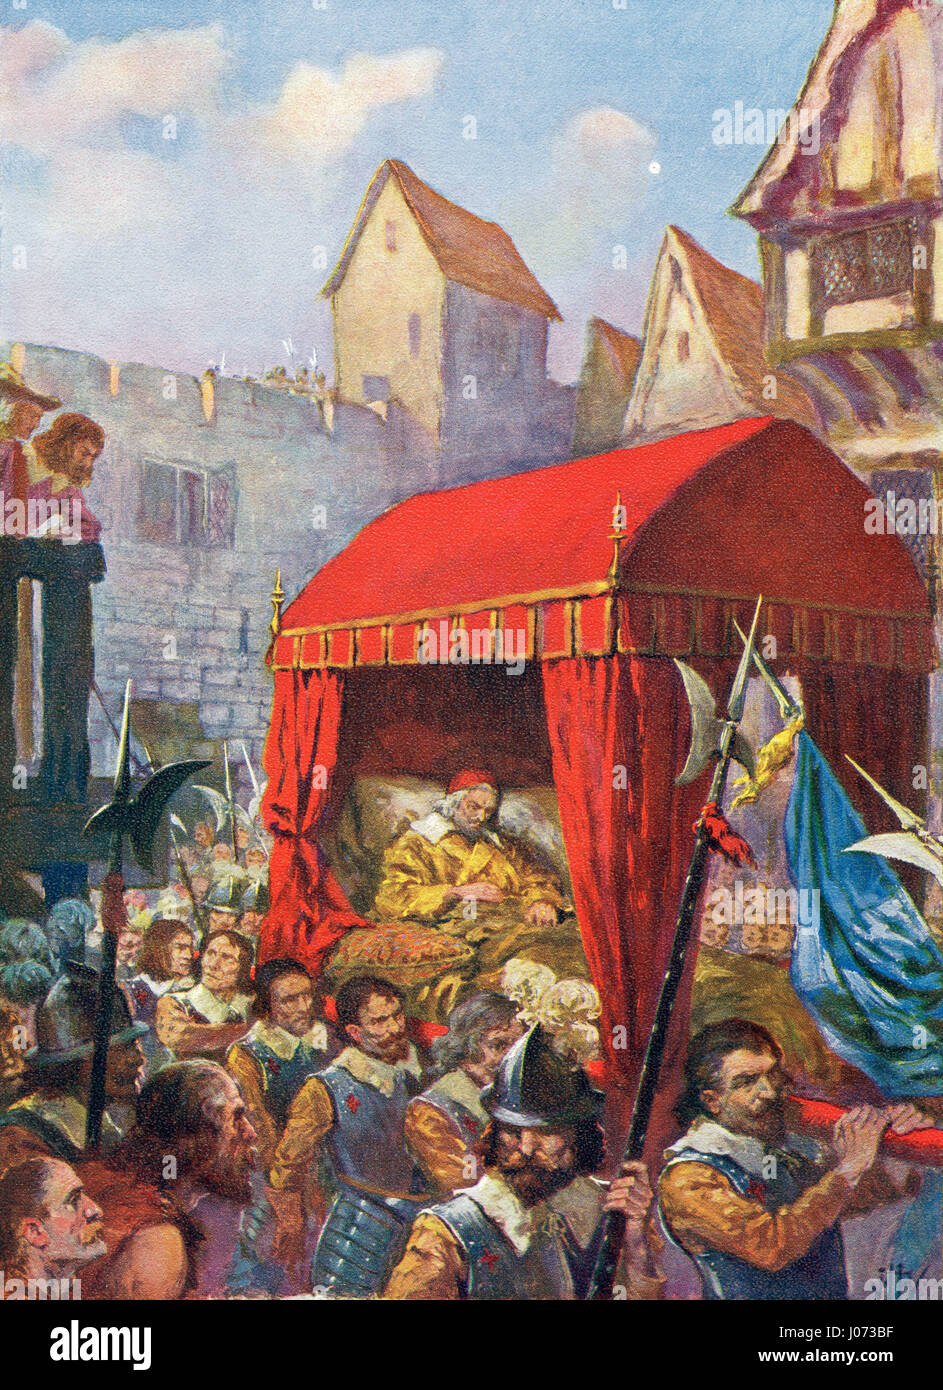 The arrival of Cardinal Richelieu and his guards at Lyons, France in 1642  during the Cinq-Mars conspiration. Cardinal Armand Jean du Plessis, Duke of  Richelieu and Fronsac, 1585 – 1642, commonly referred